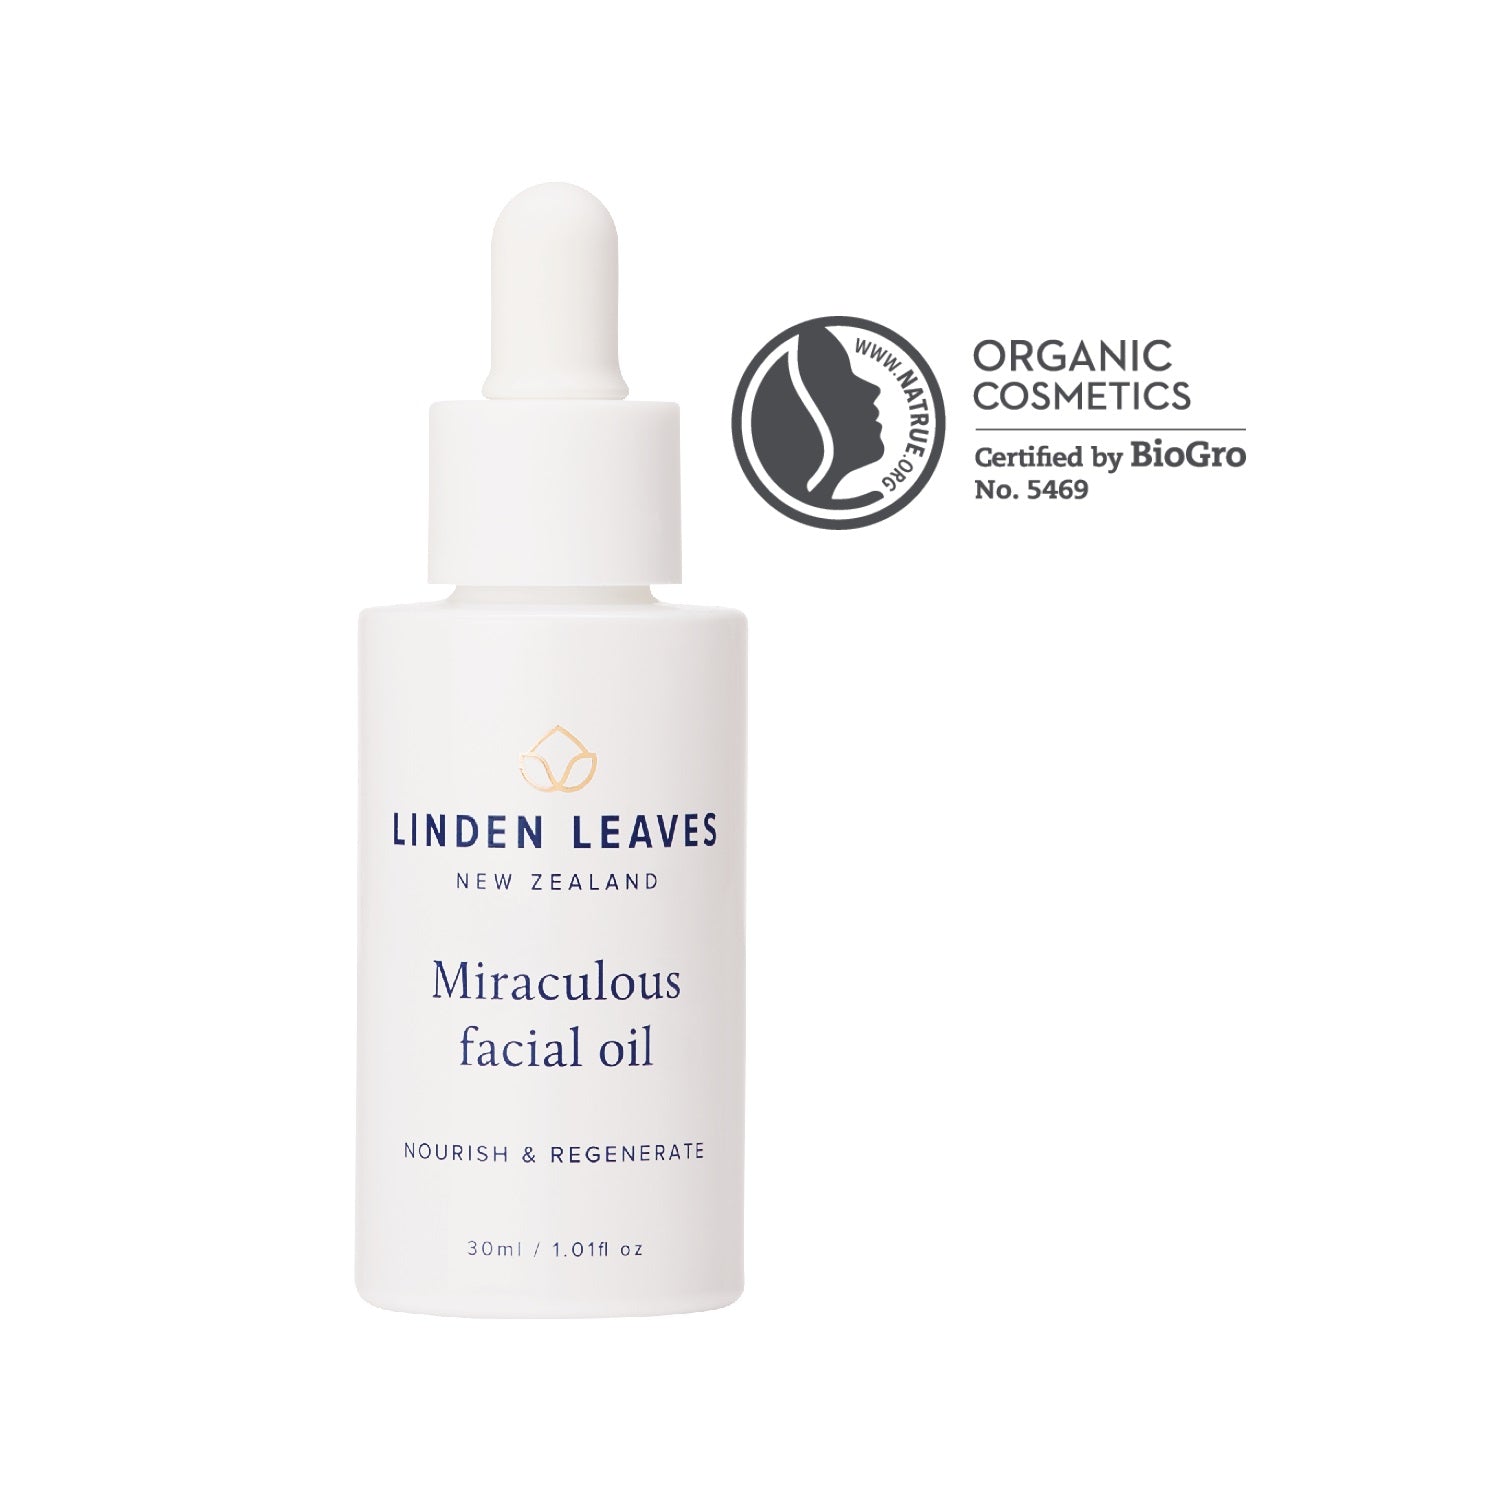 Linden Leaves Miraculous Facial Oil 30ml.